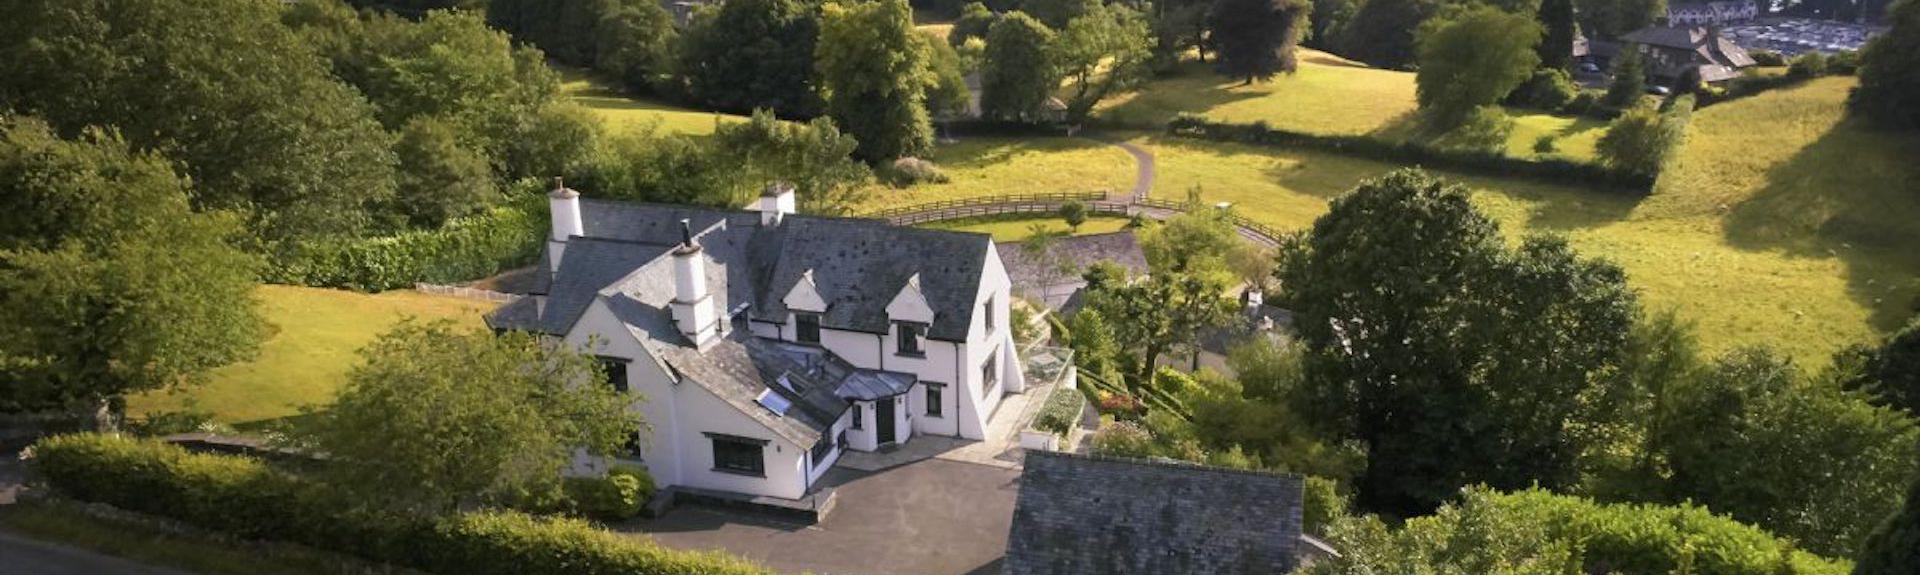 Aerial view of a holiday cottage surrounded by fields overlooking Lake Windermere.